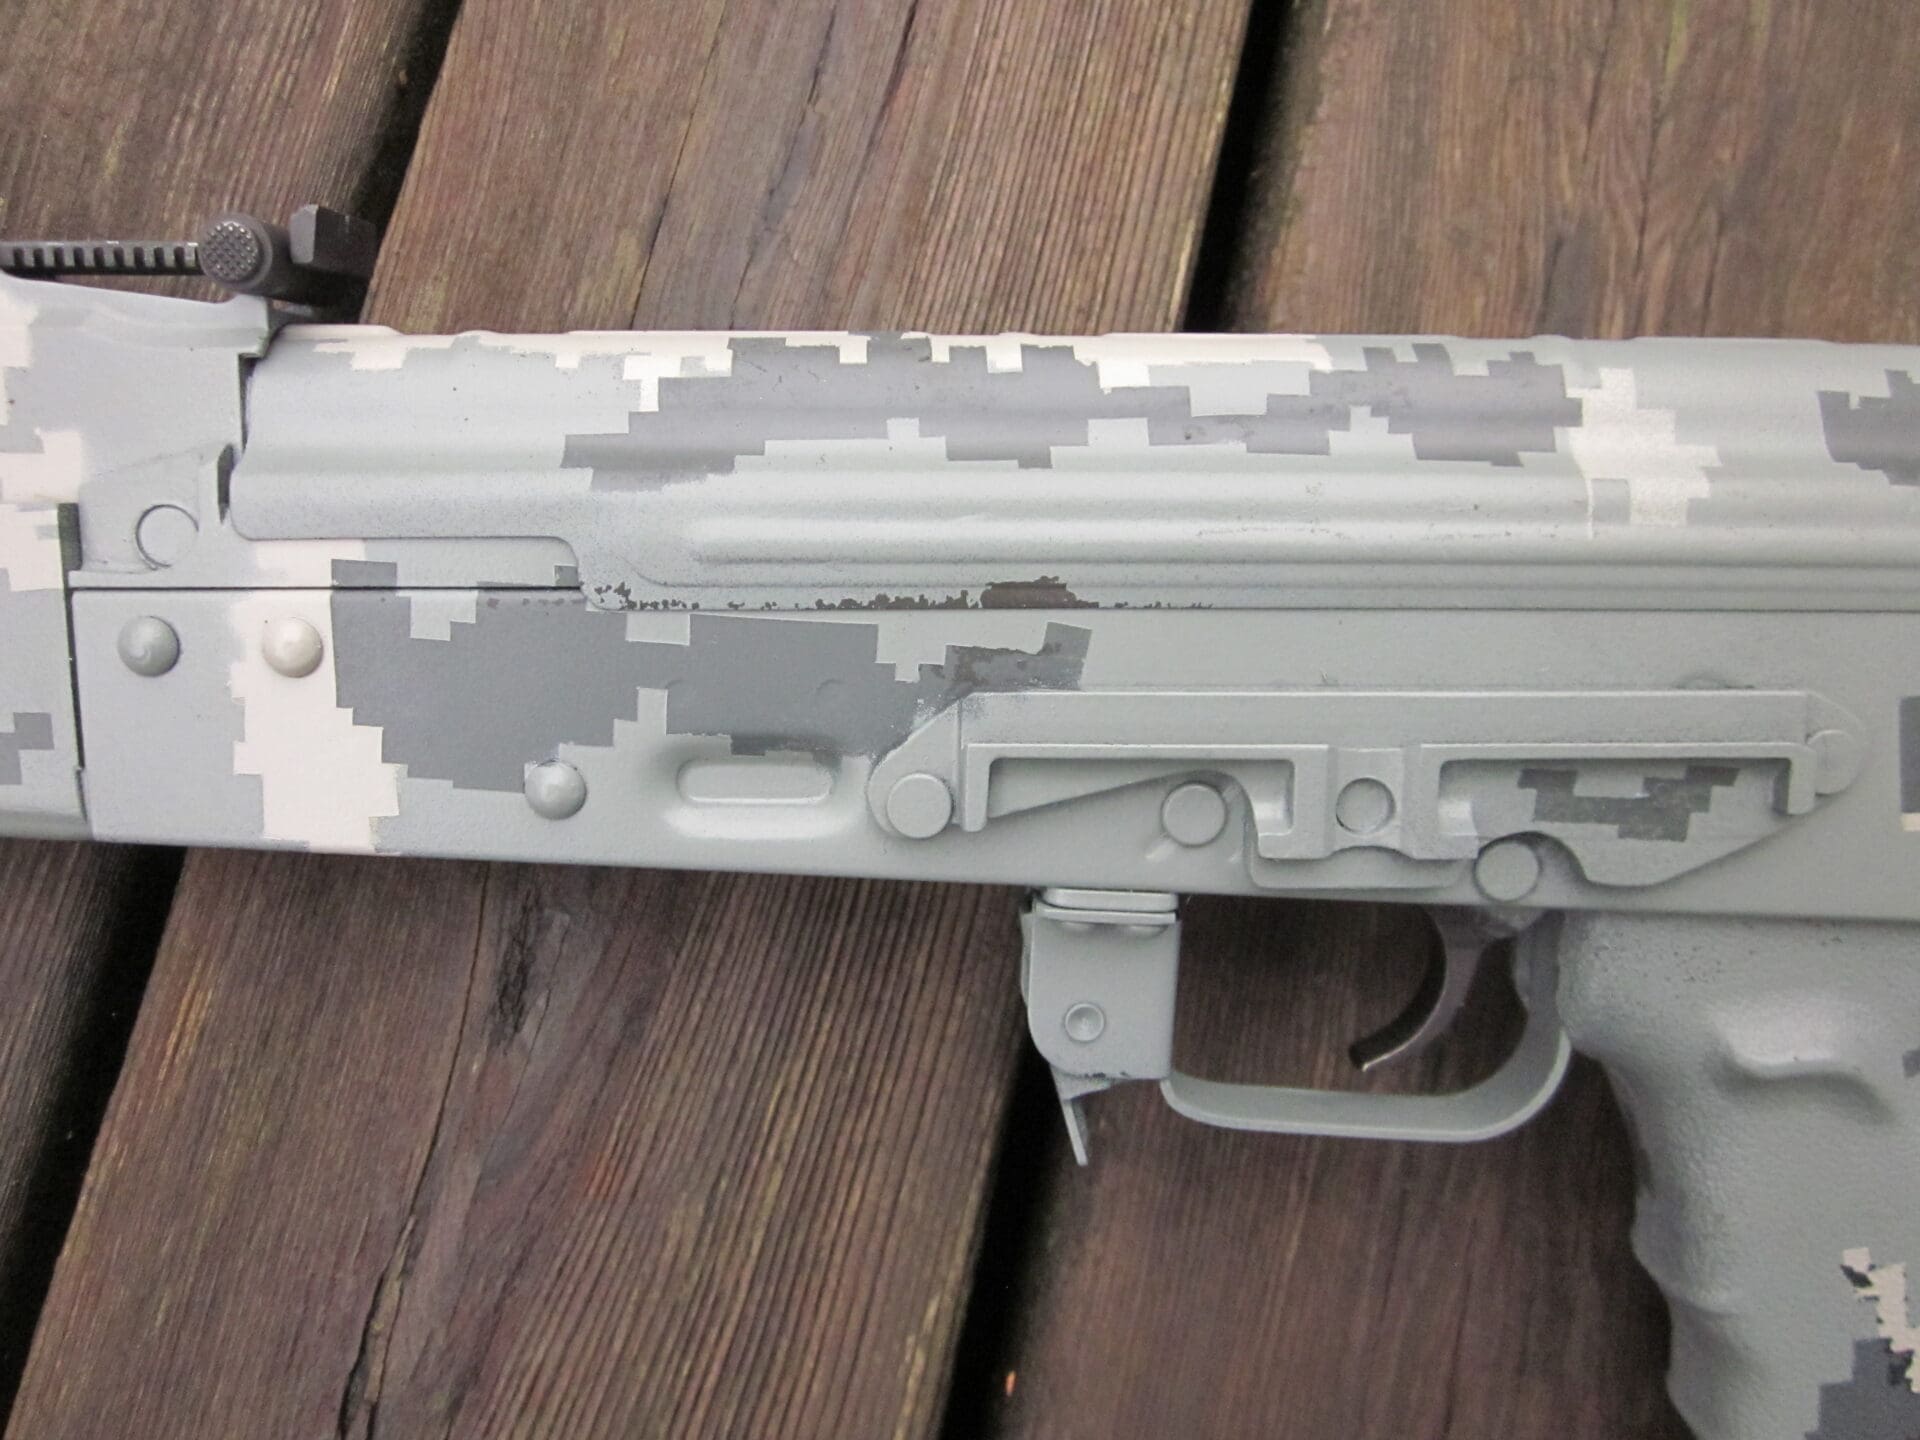 Gear Review: Duracoat EasyWay ACU Camo Kit - The Truth About Guns